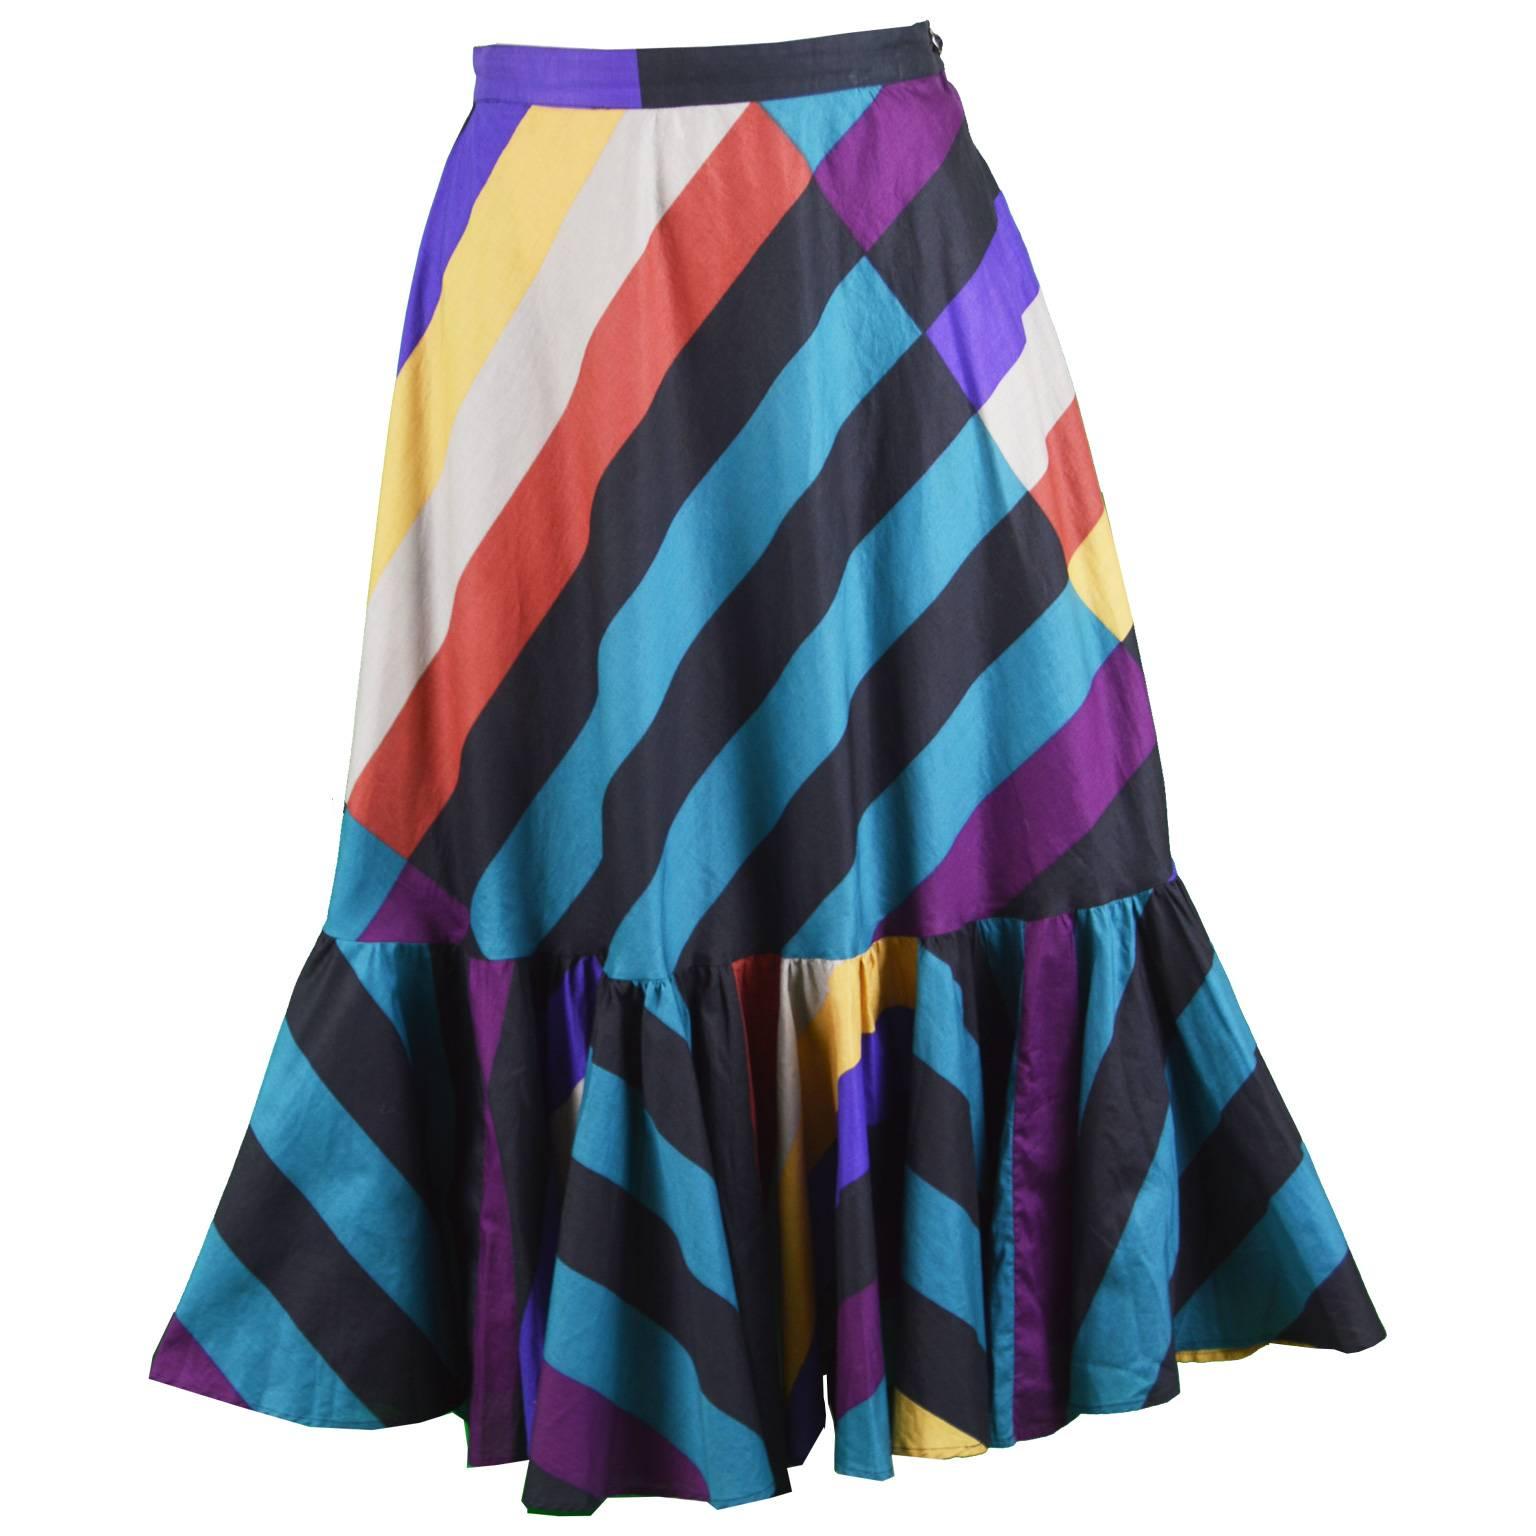 Gucci Vintage Colorful Striped Cotton Skirt with Full Flounce Hem, 1970s